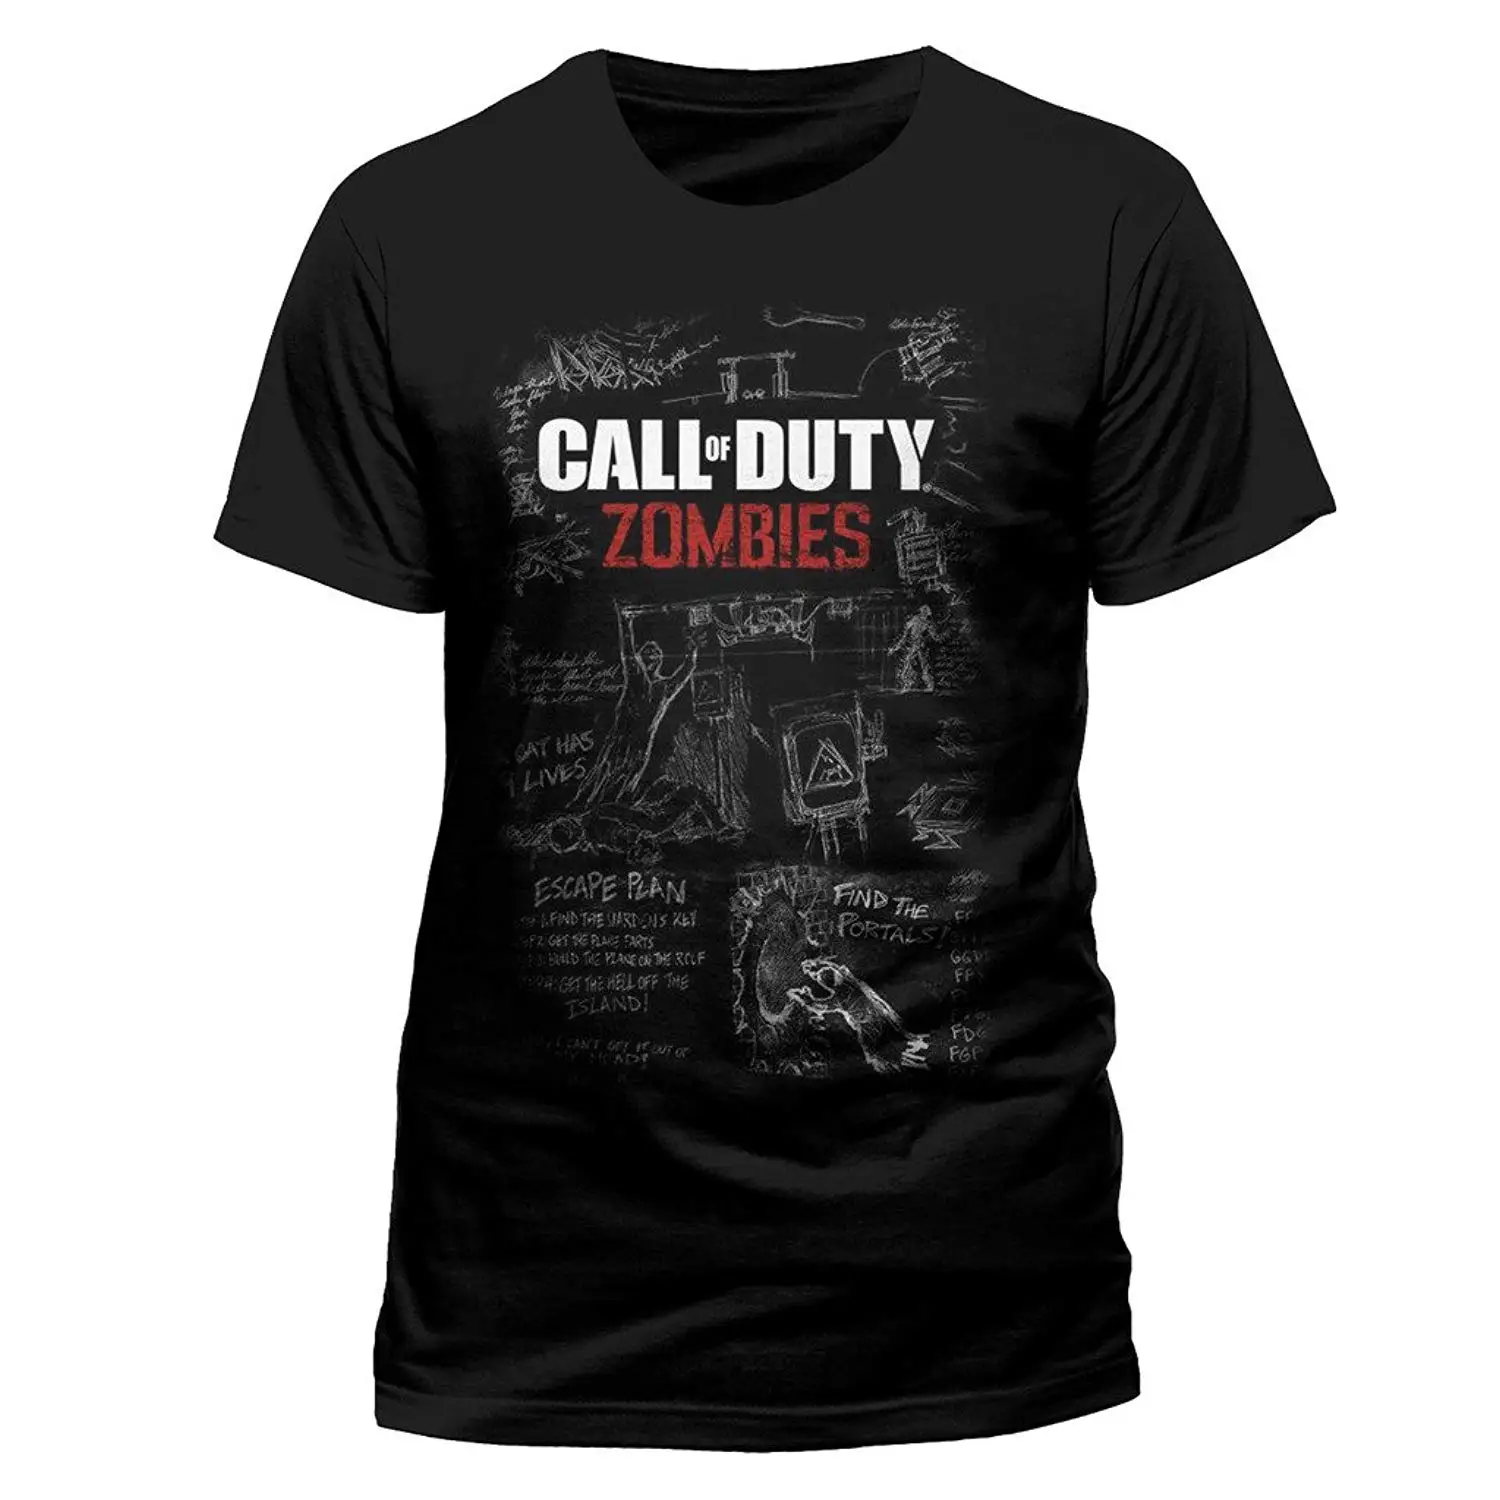 Cheap Black Ops Zombies Kino Der Toten Glitches Find Black Ops Zombies Kino Der Toten Glitches Deals On Line At Alibaba Com